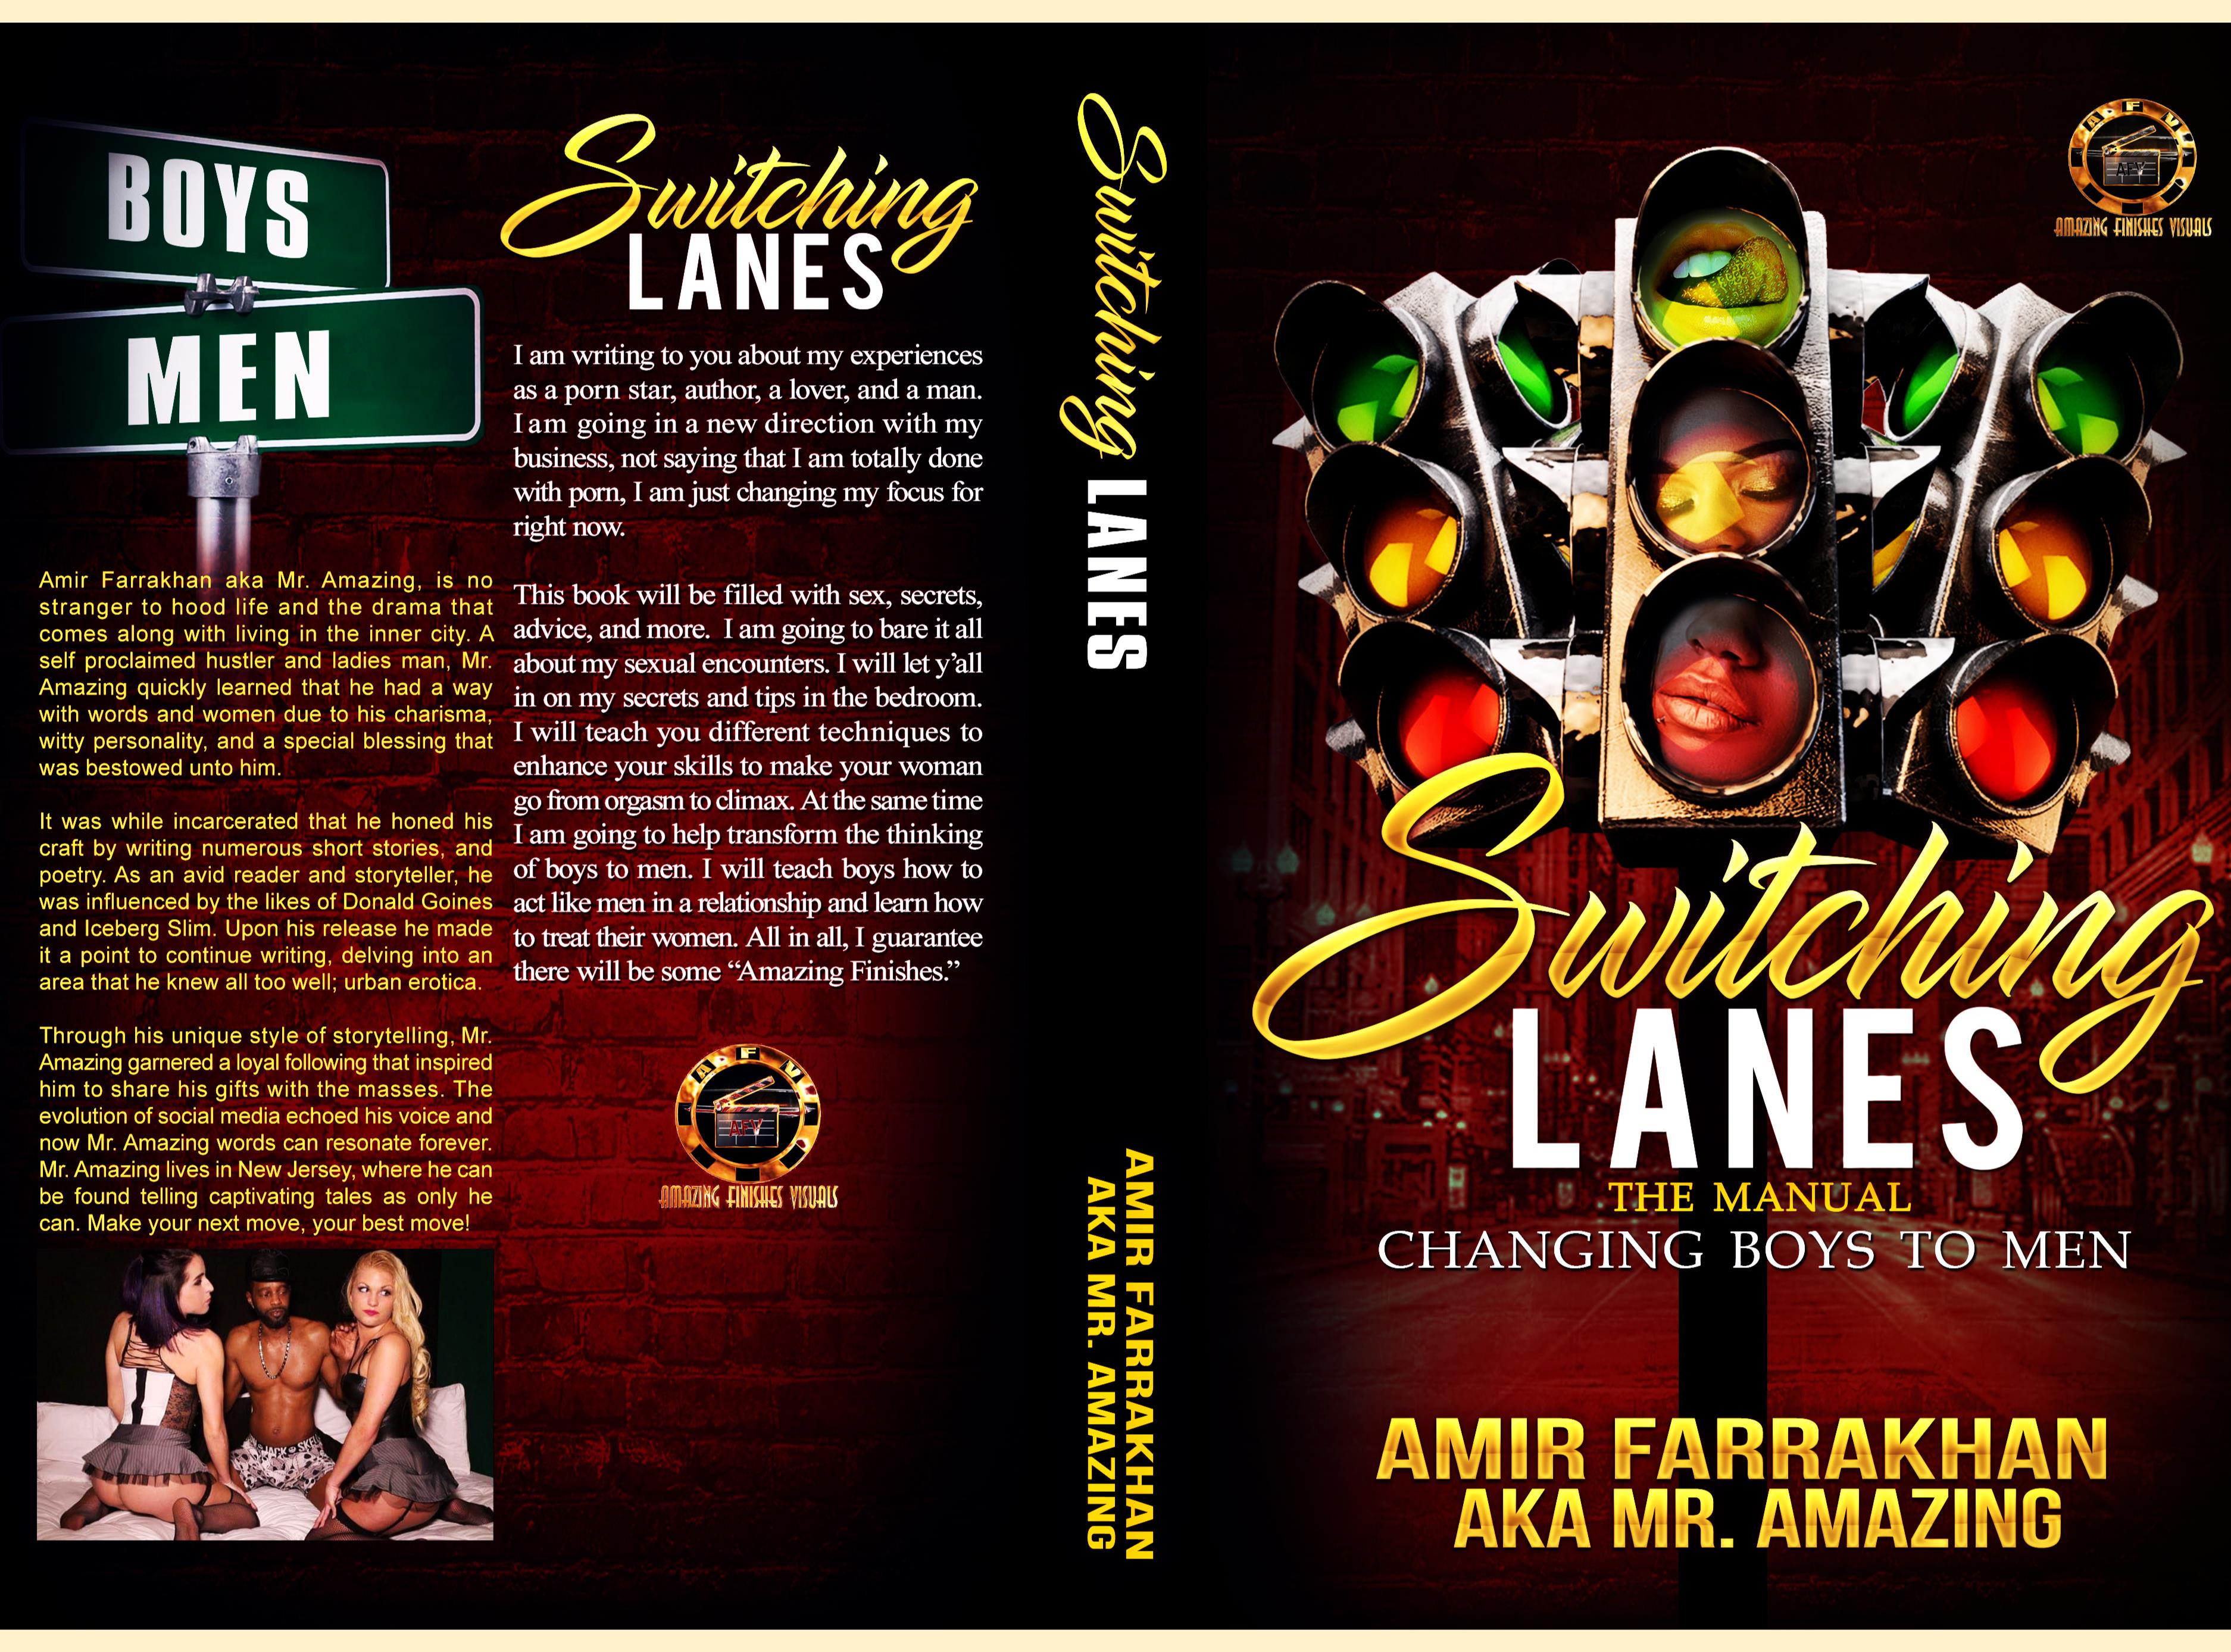 Changing Lanes (Color Edition) cover image